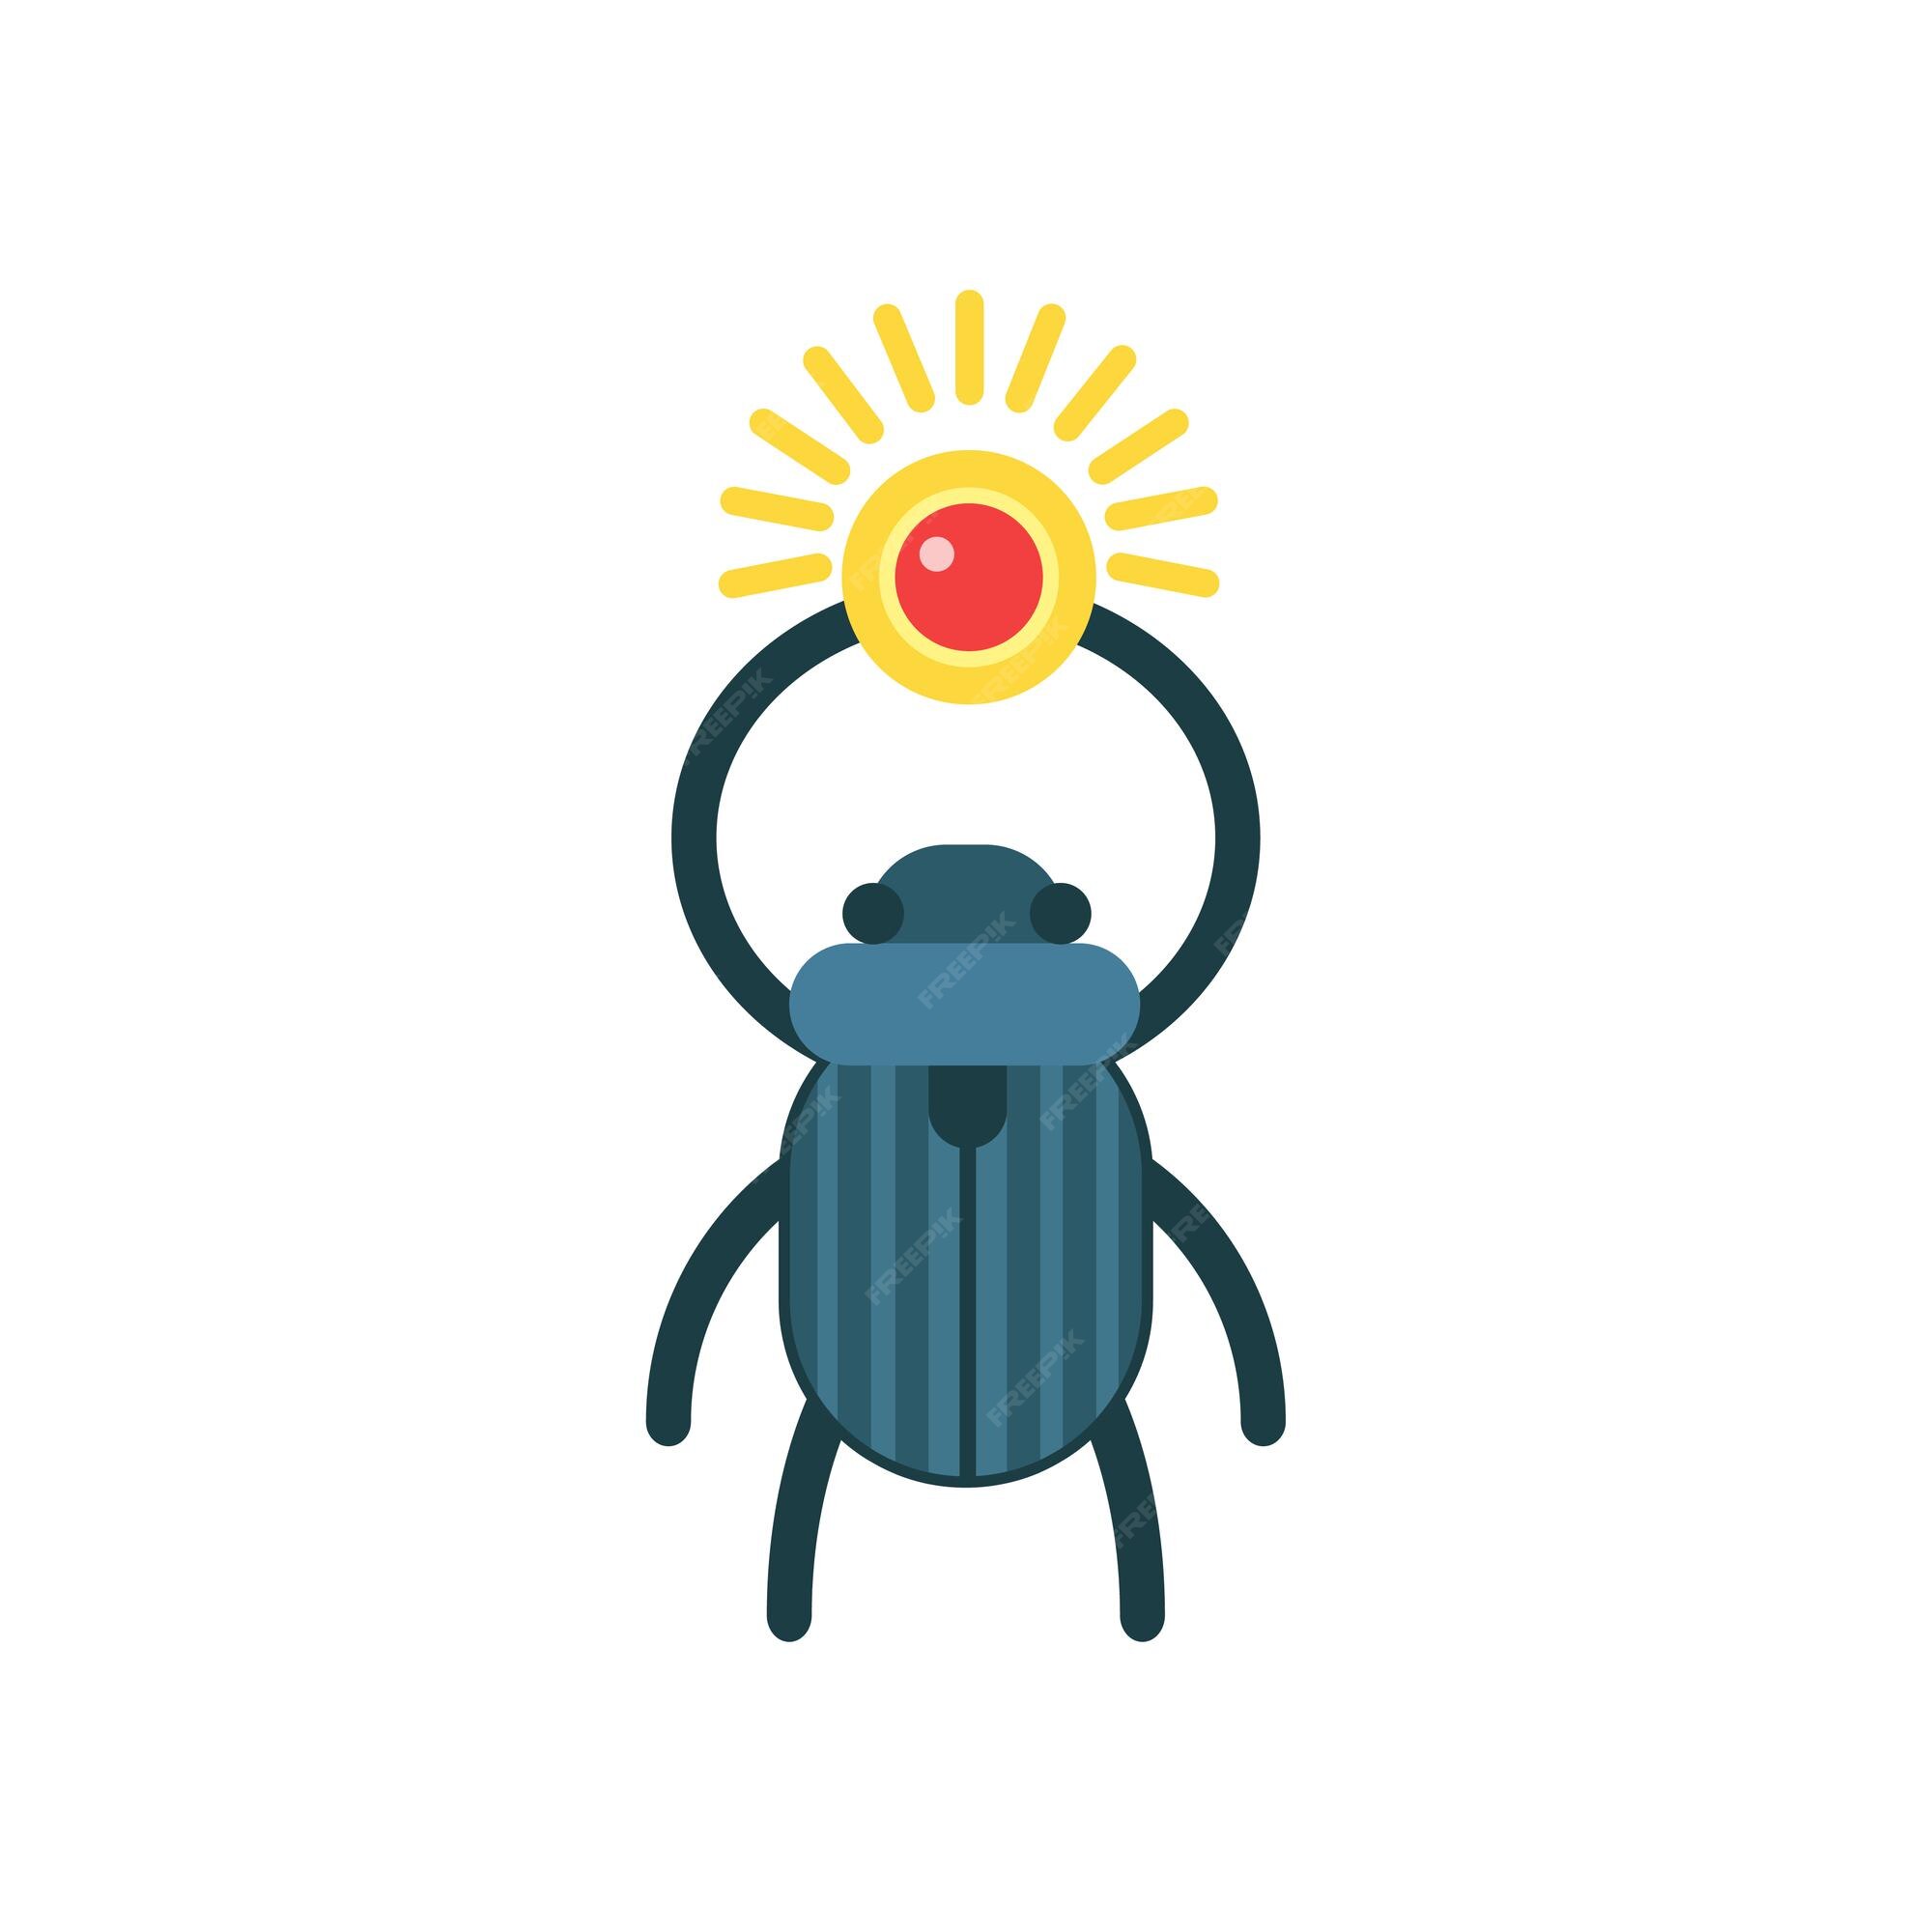 Premium Vector | Beetle scarab with sun, symbol of ancient egypt,  traditional egyptian culture vector illustration on a white background